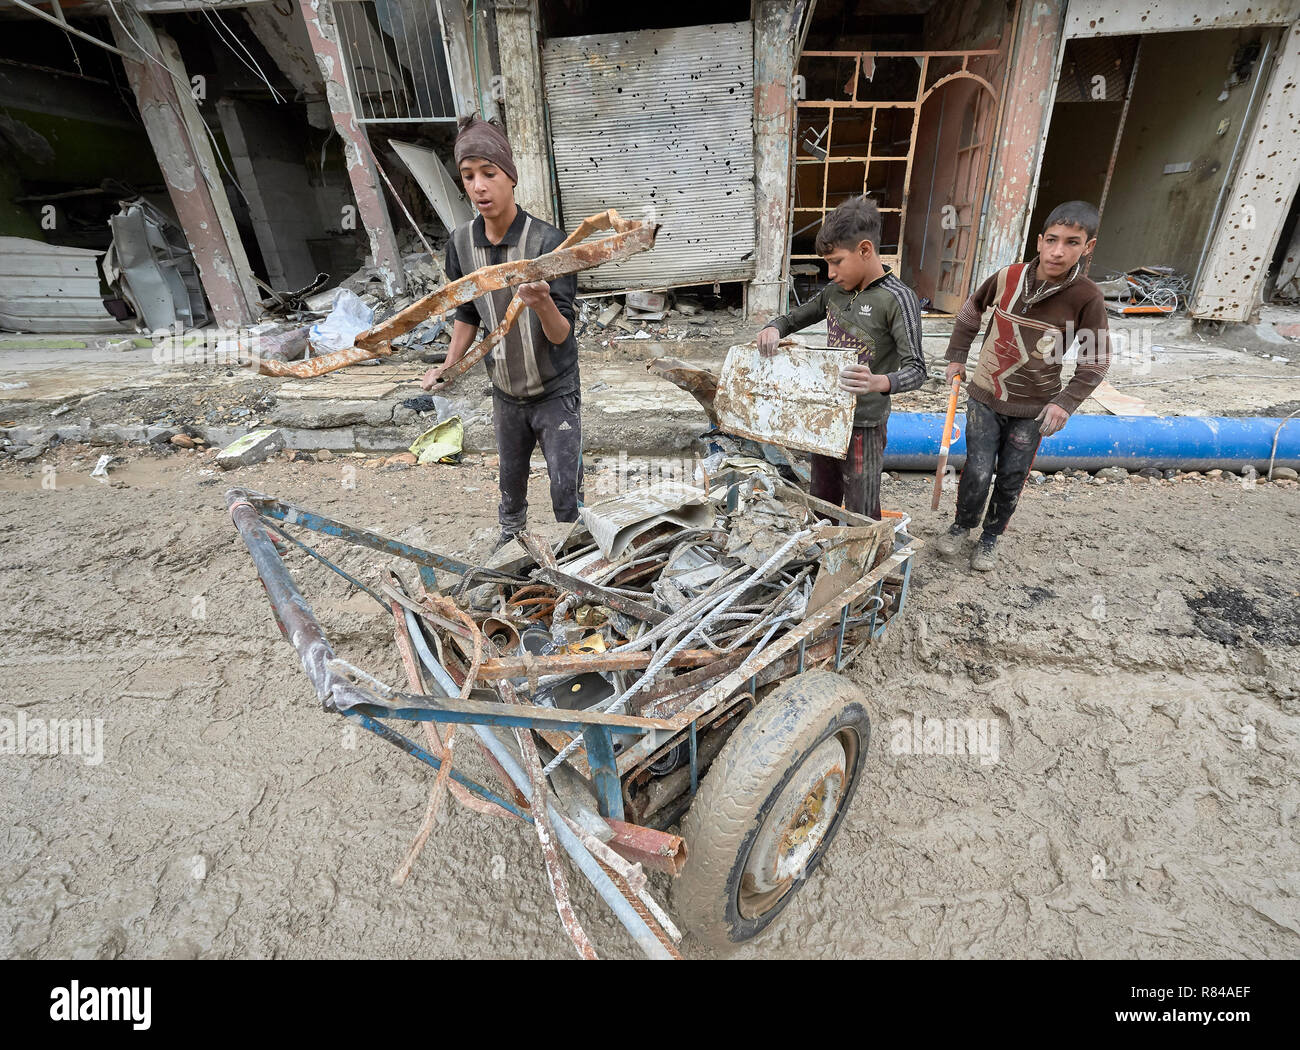 Boys scavenge recyclable metal and plastic from rubble in the old city of Mosul, Iraq. Stock Photo